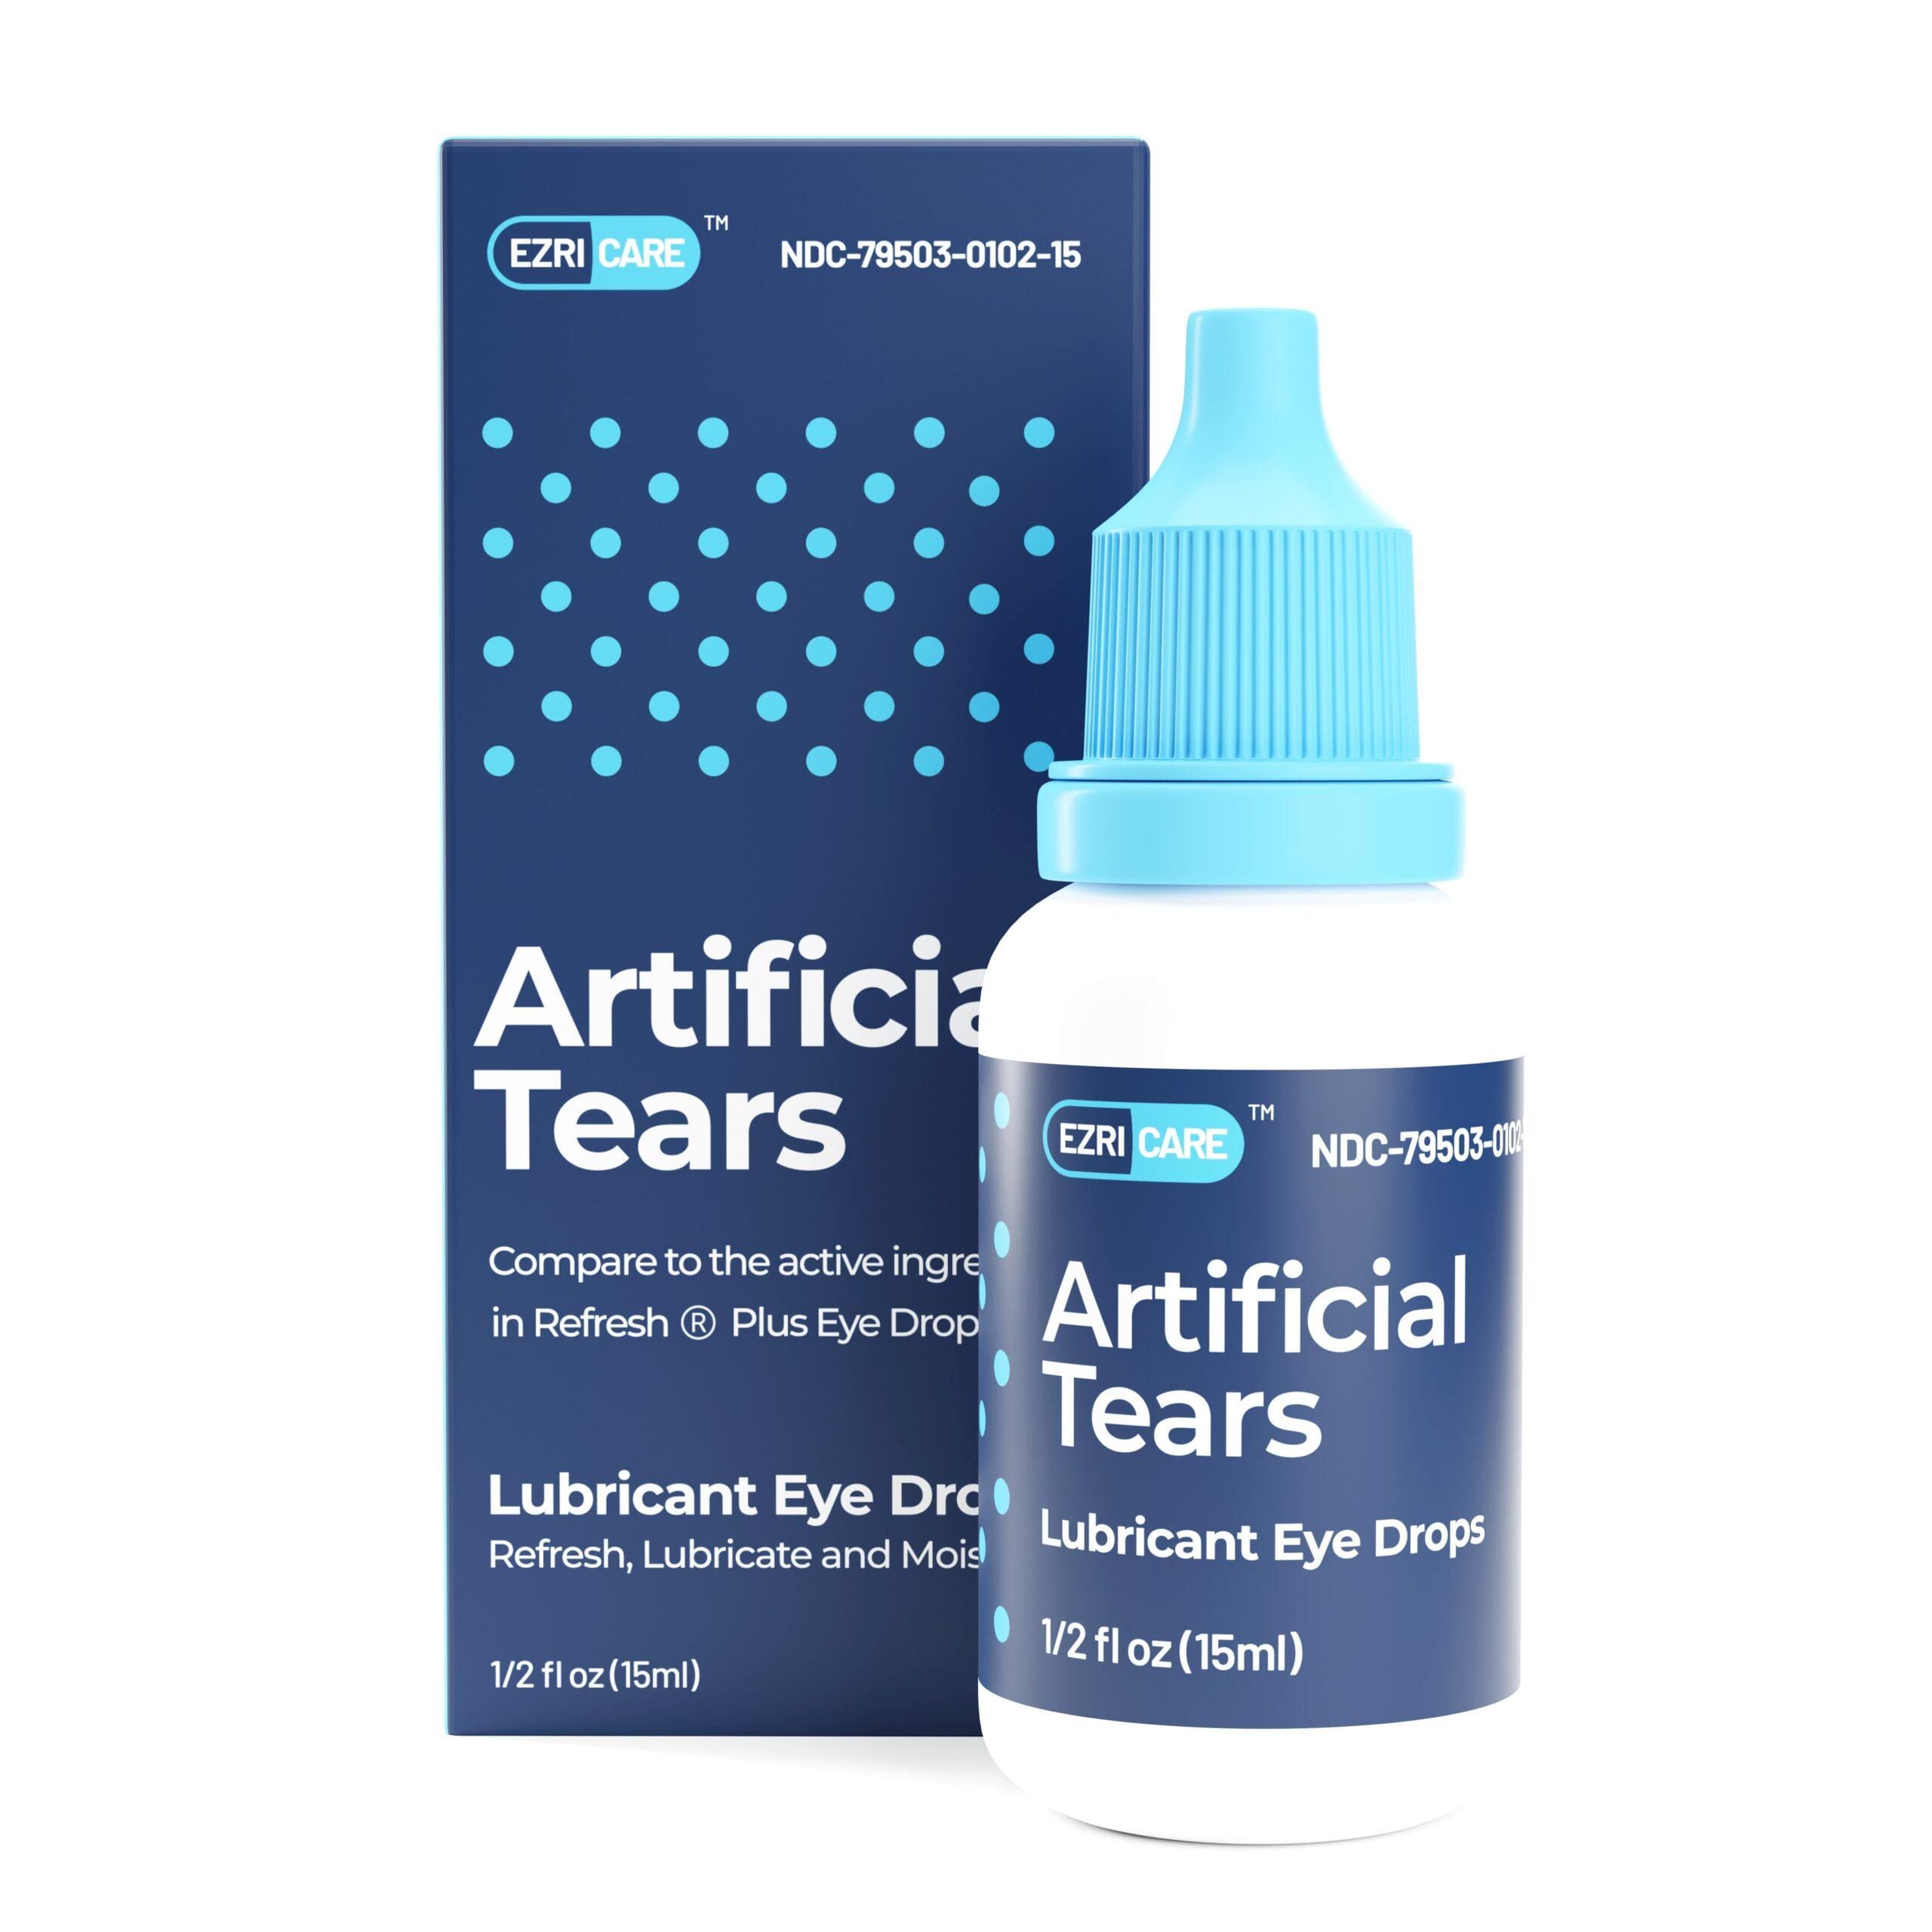 The Latest Developments In The Ezricare Artificial Tears Lawsuit 